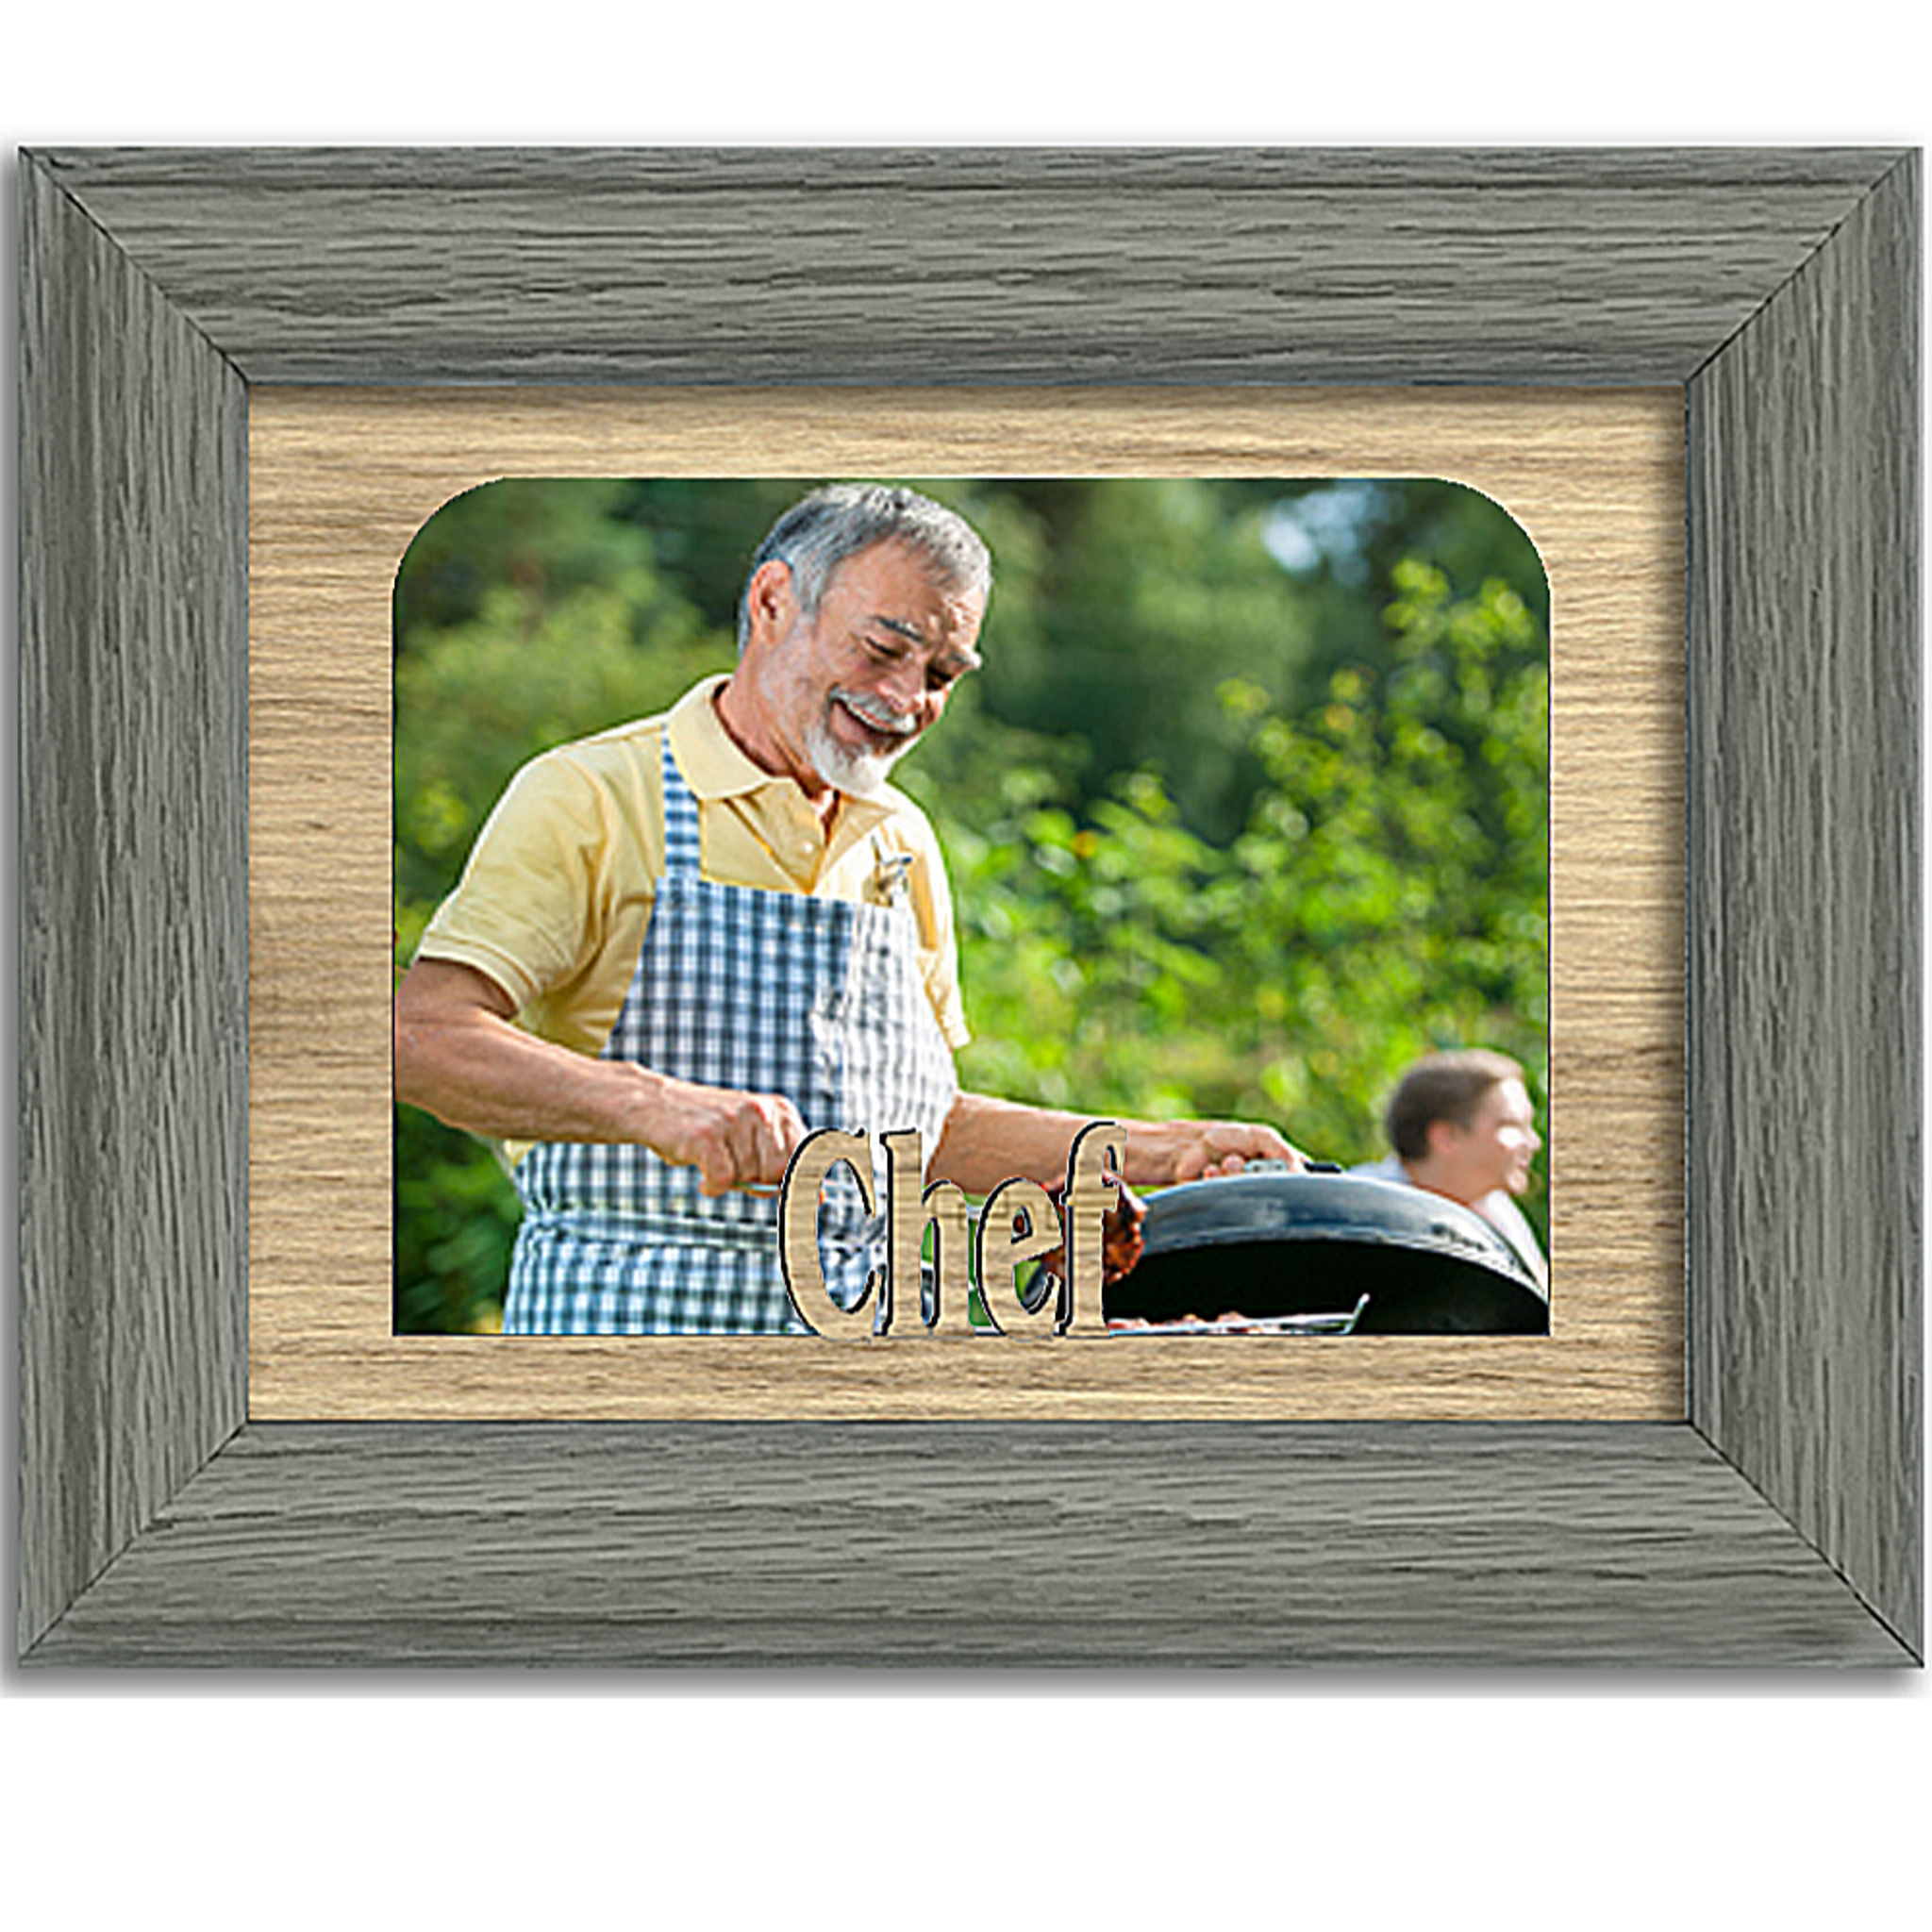 Chef Tabletop Photo Frame